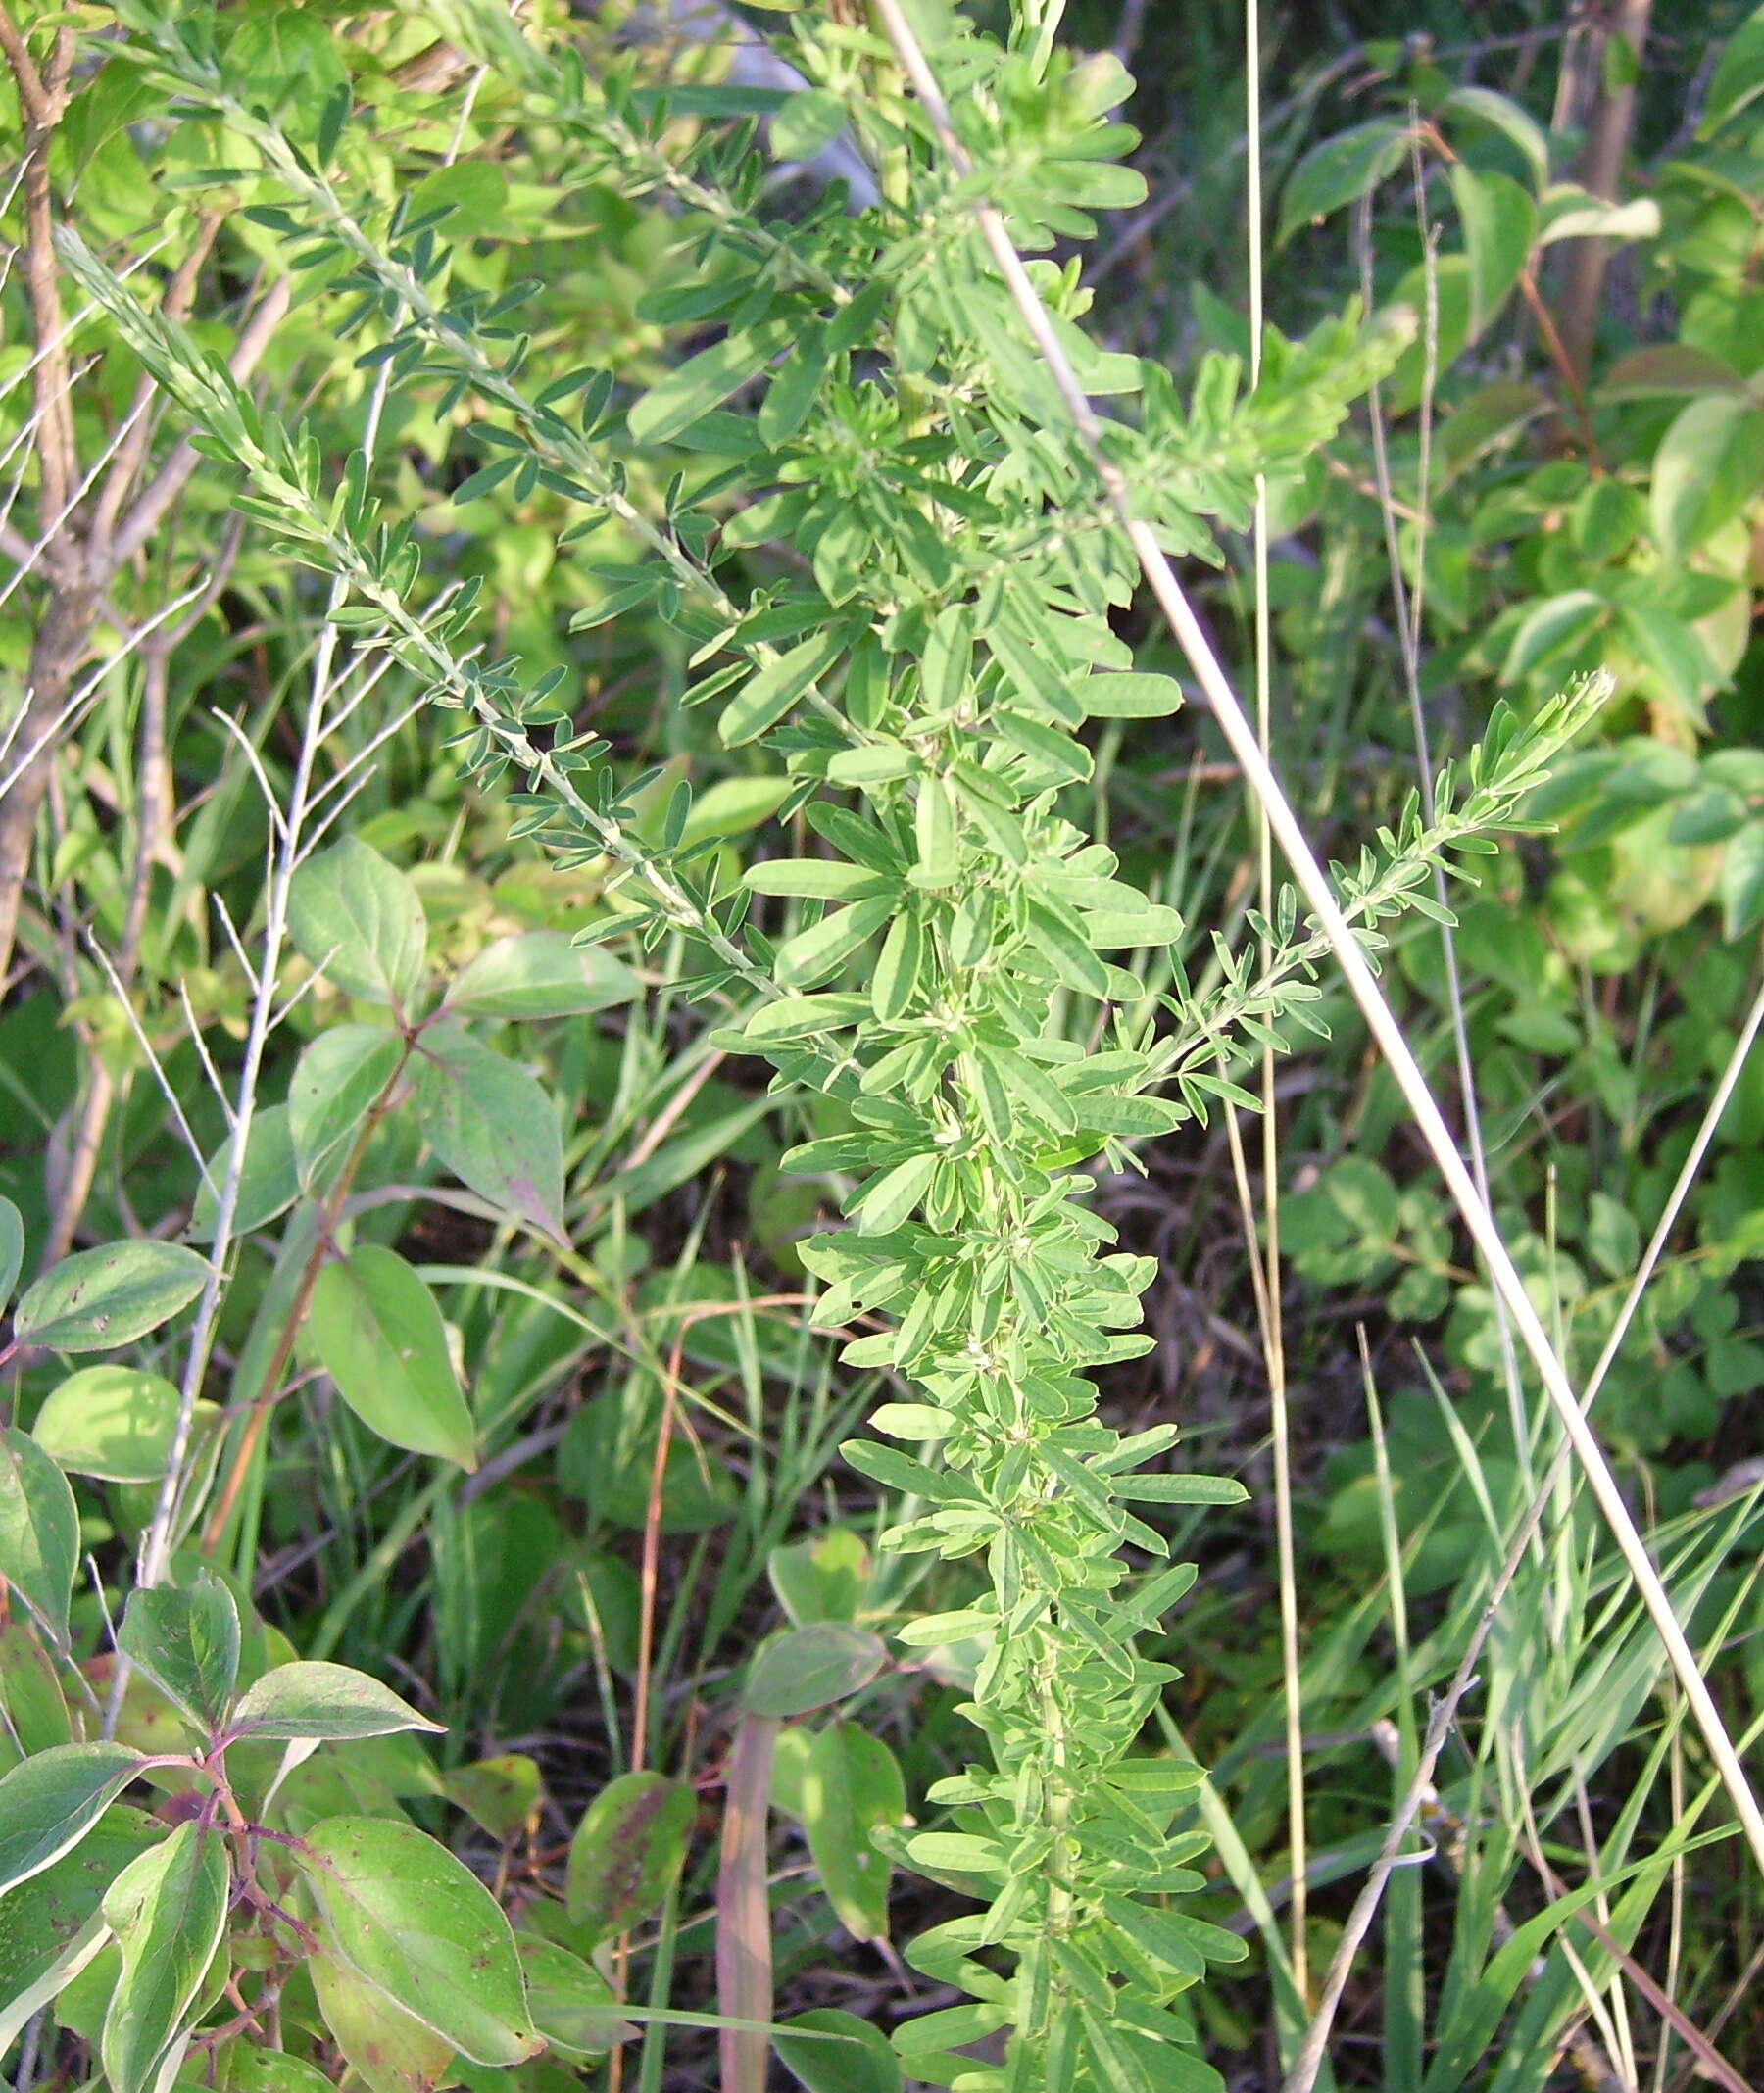 Image of Chinese Bush-Clover